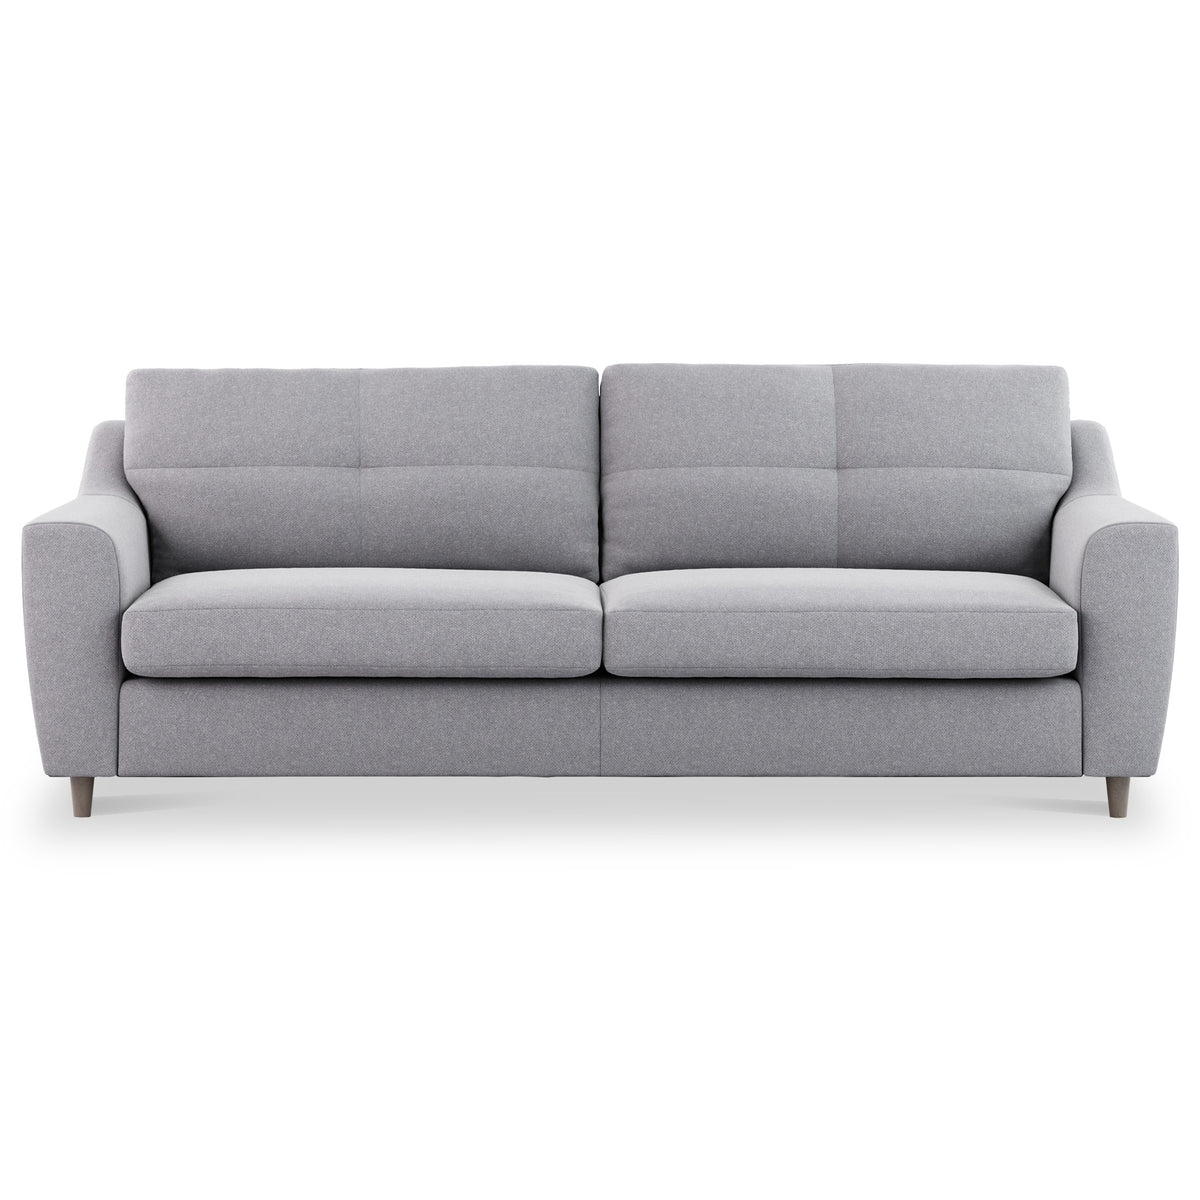 Justin Silver 4 Seater Sofa Couch Roseland Furniture